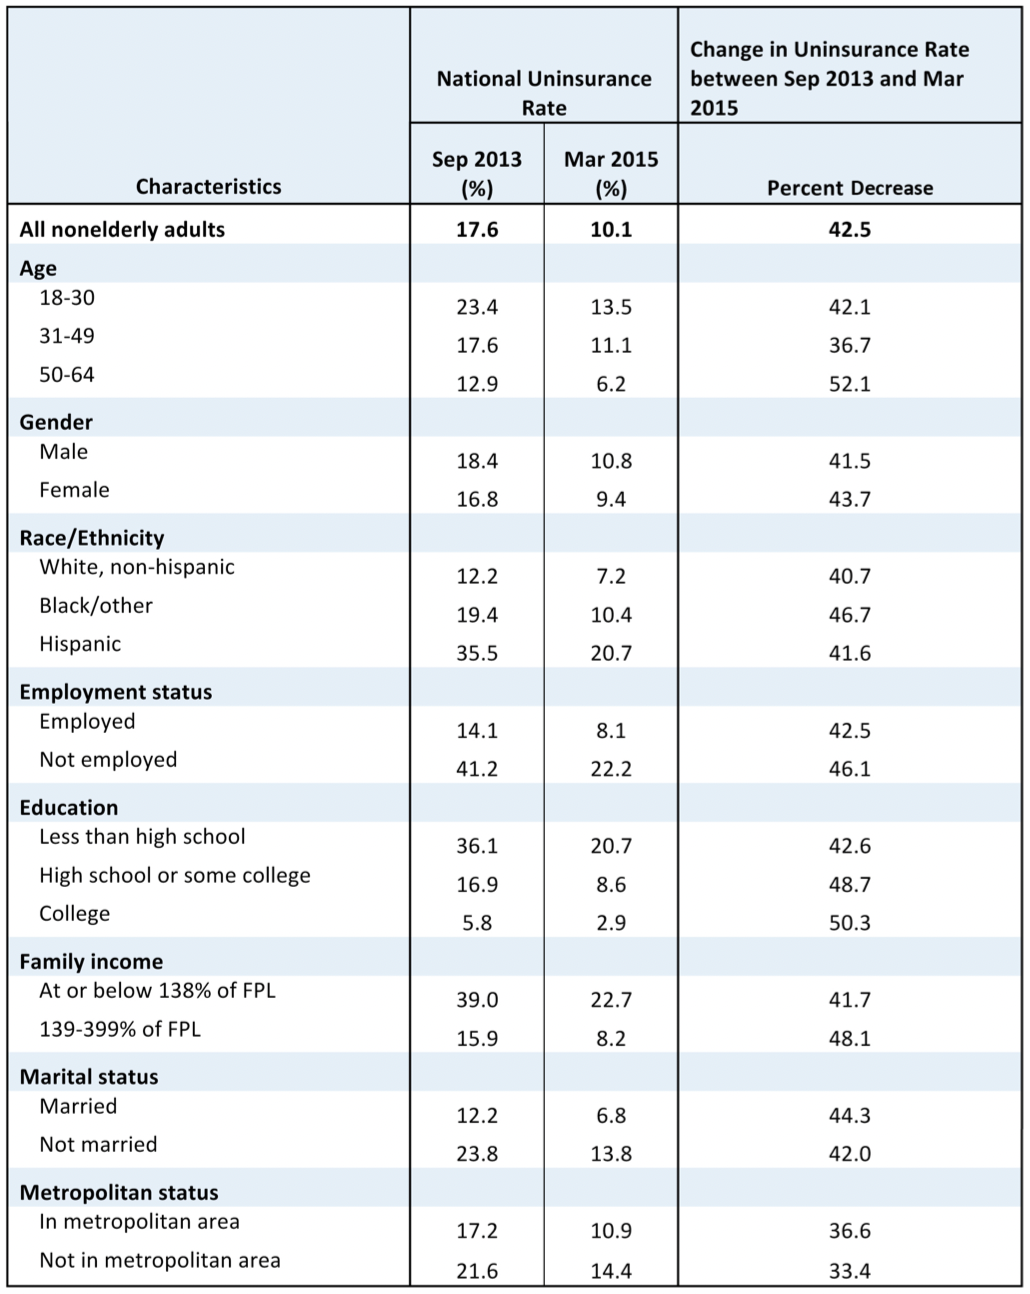 This table compares the uninsured rates for nonelderly U.S. adults across demographic groups.